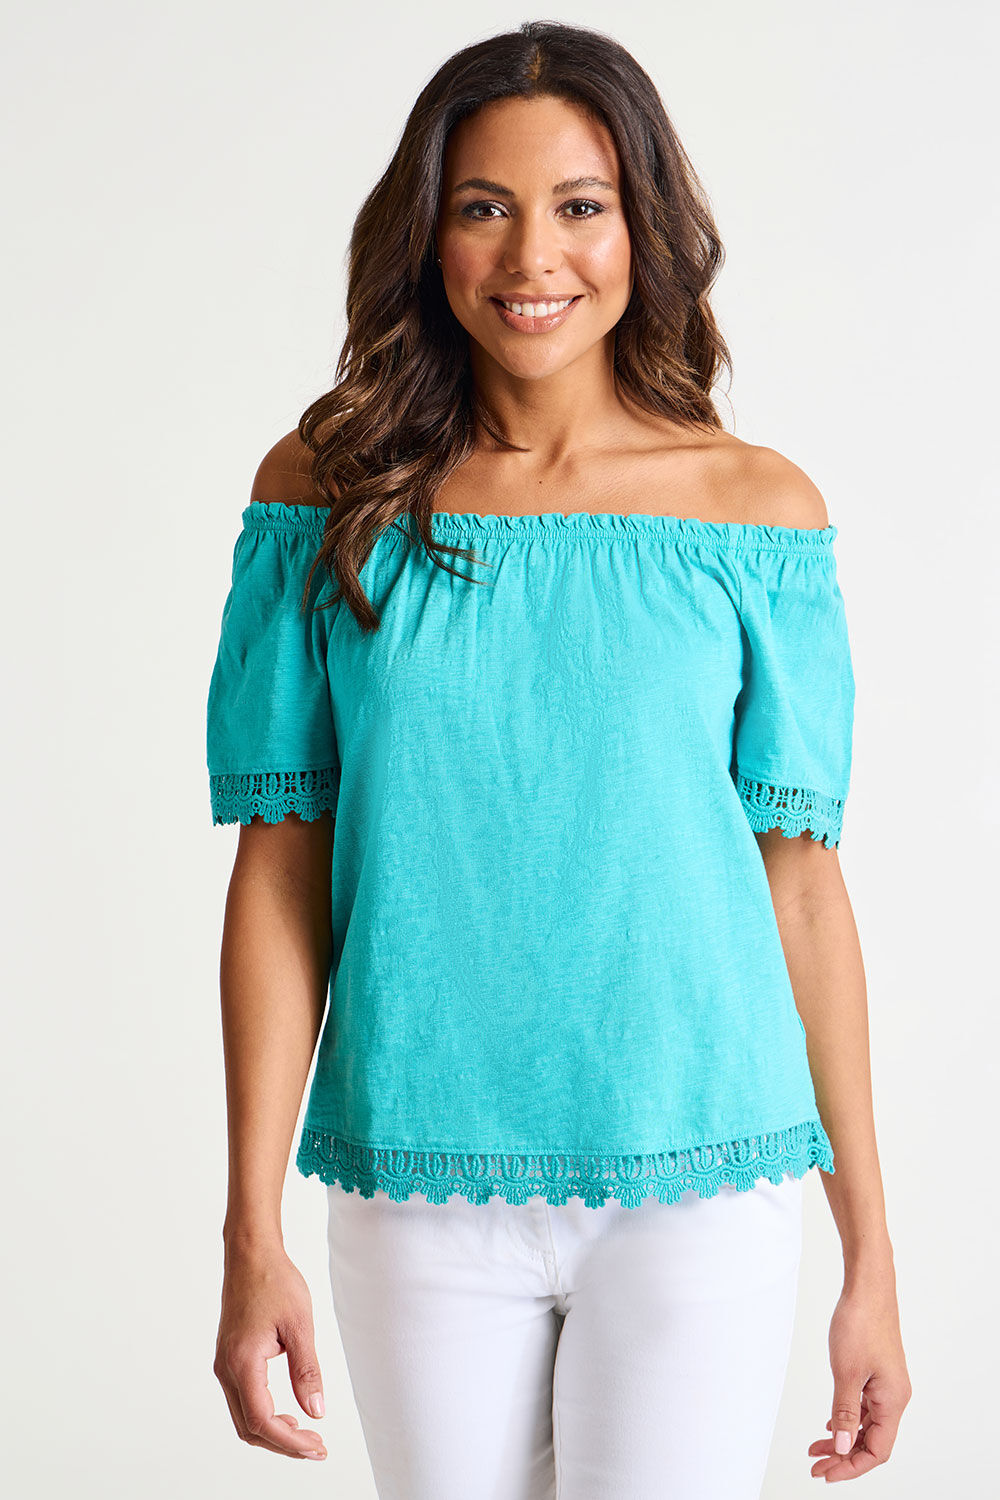 Bonmarche Turquoise Short Sleeve Jersey Bardot Top With Lace Trim, Size: 20 - Holiday Shop